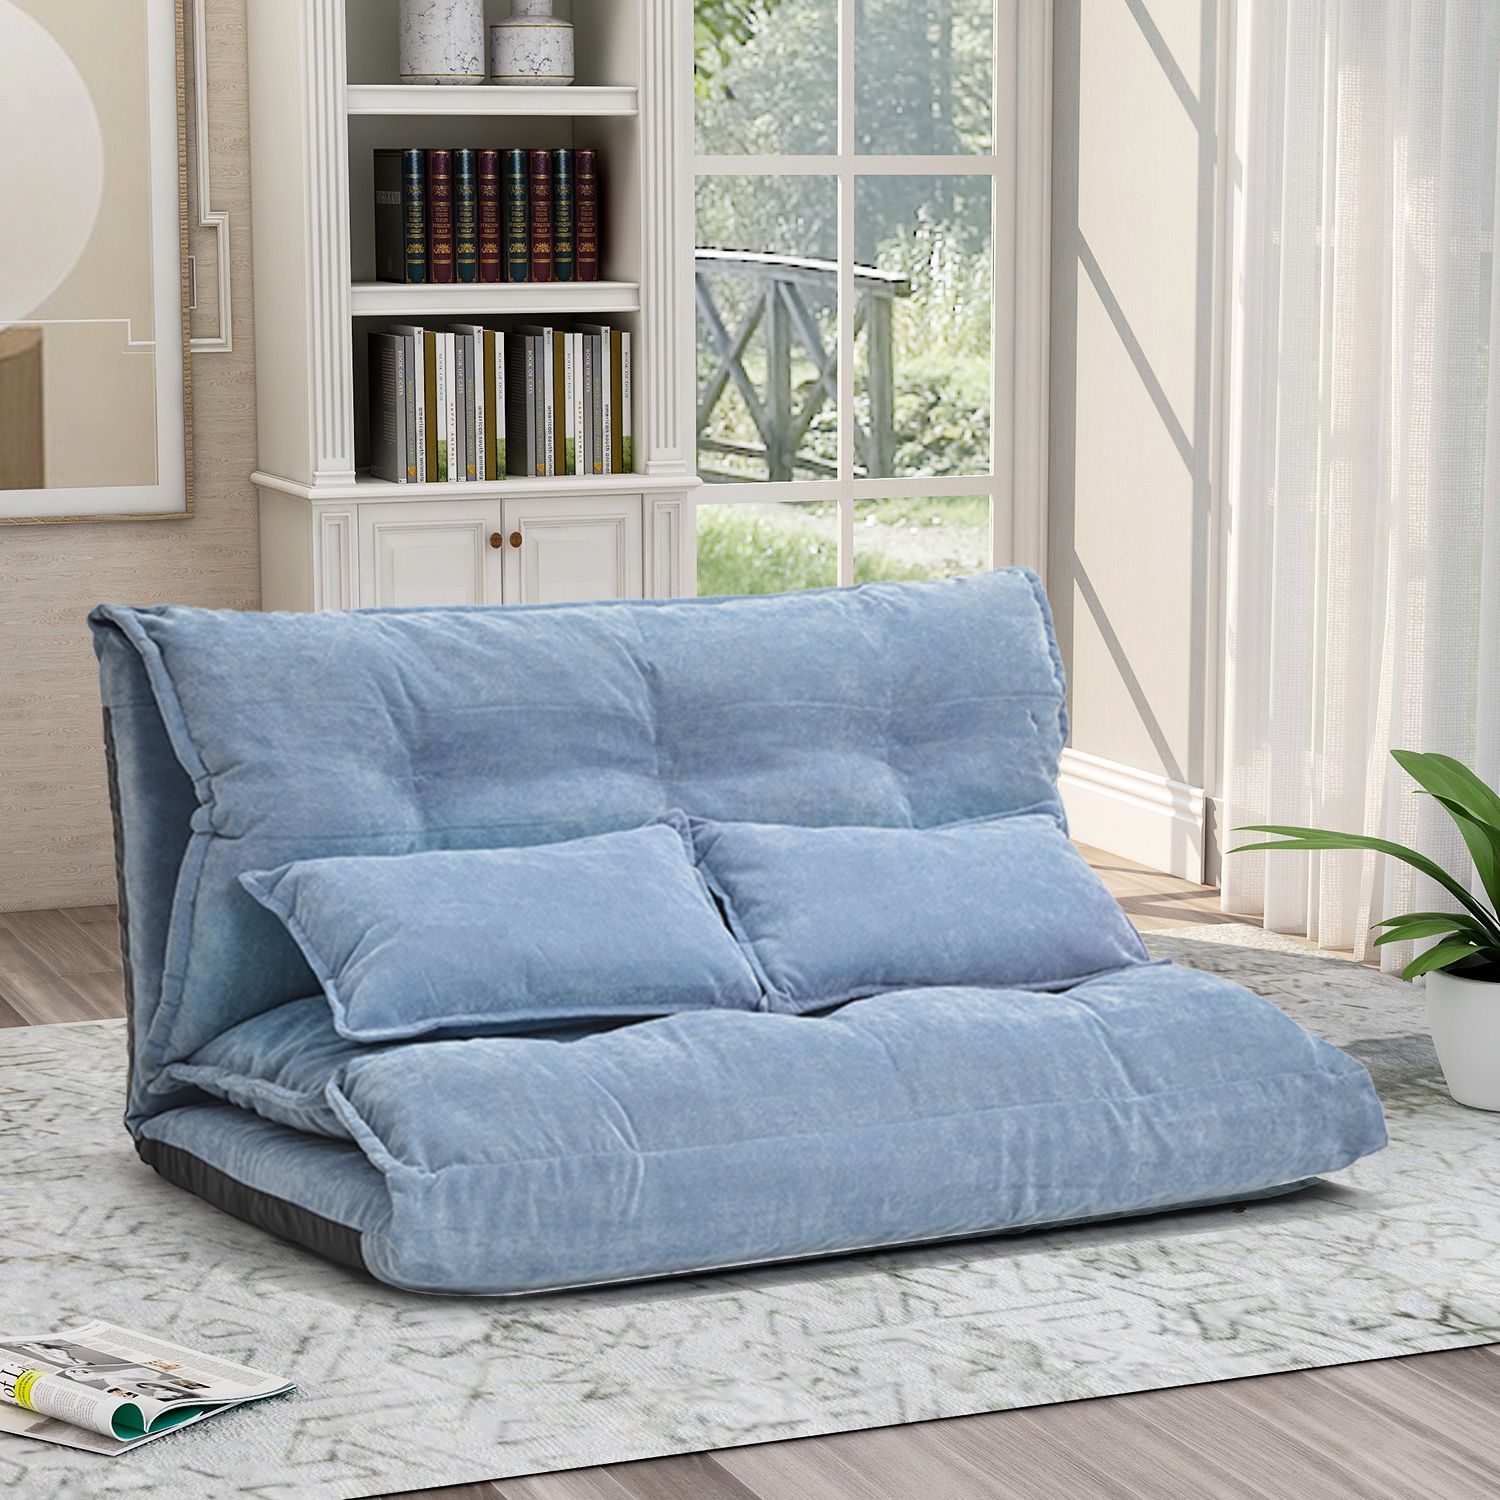 Folding Sofa Bed, Floor Couch Bed Sofa With 5 Adjustable In Fold Up Sofa Chairs (View 11 of 15)